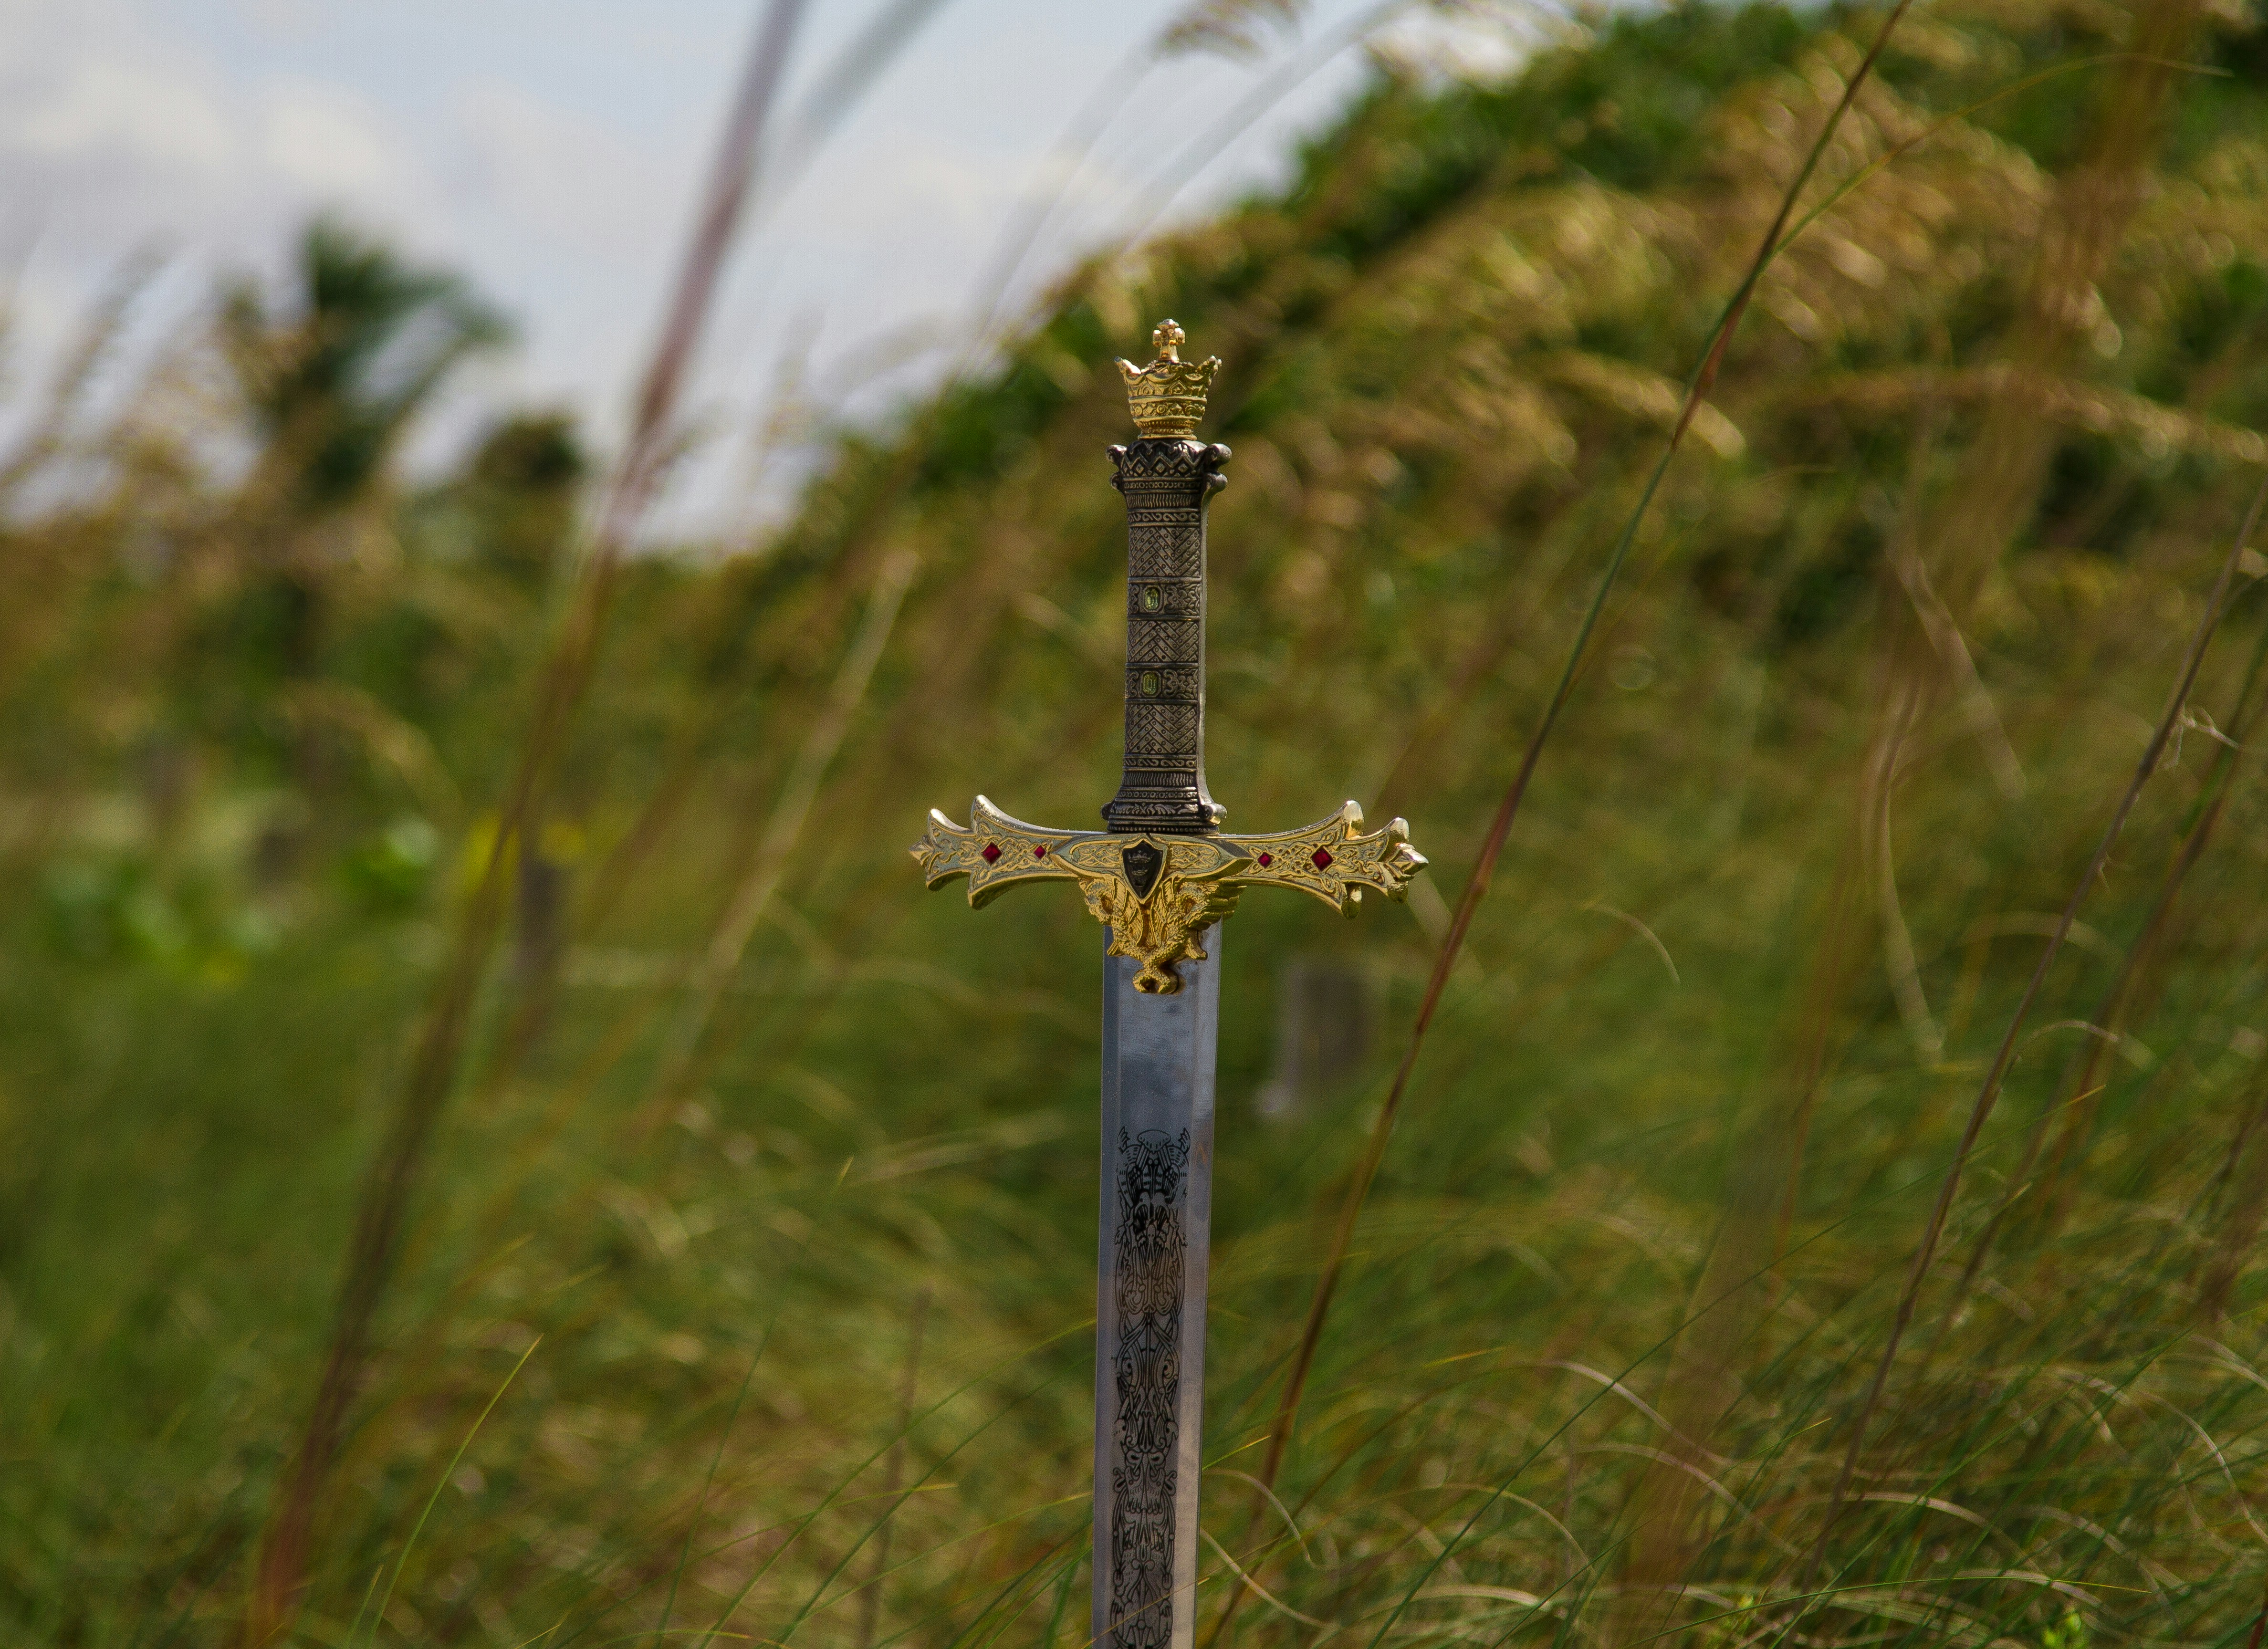 Decorated sword in grass field